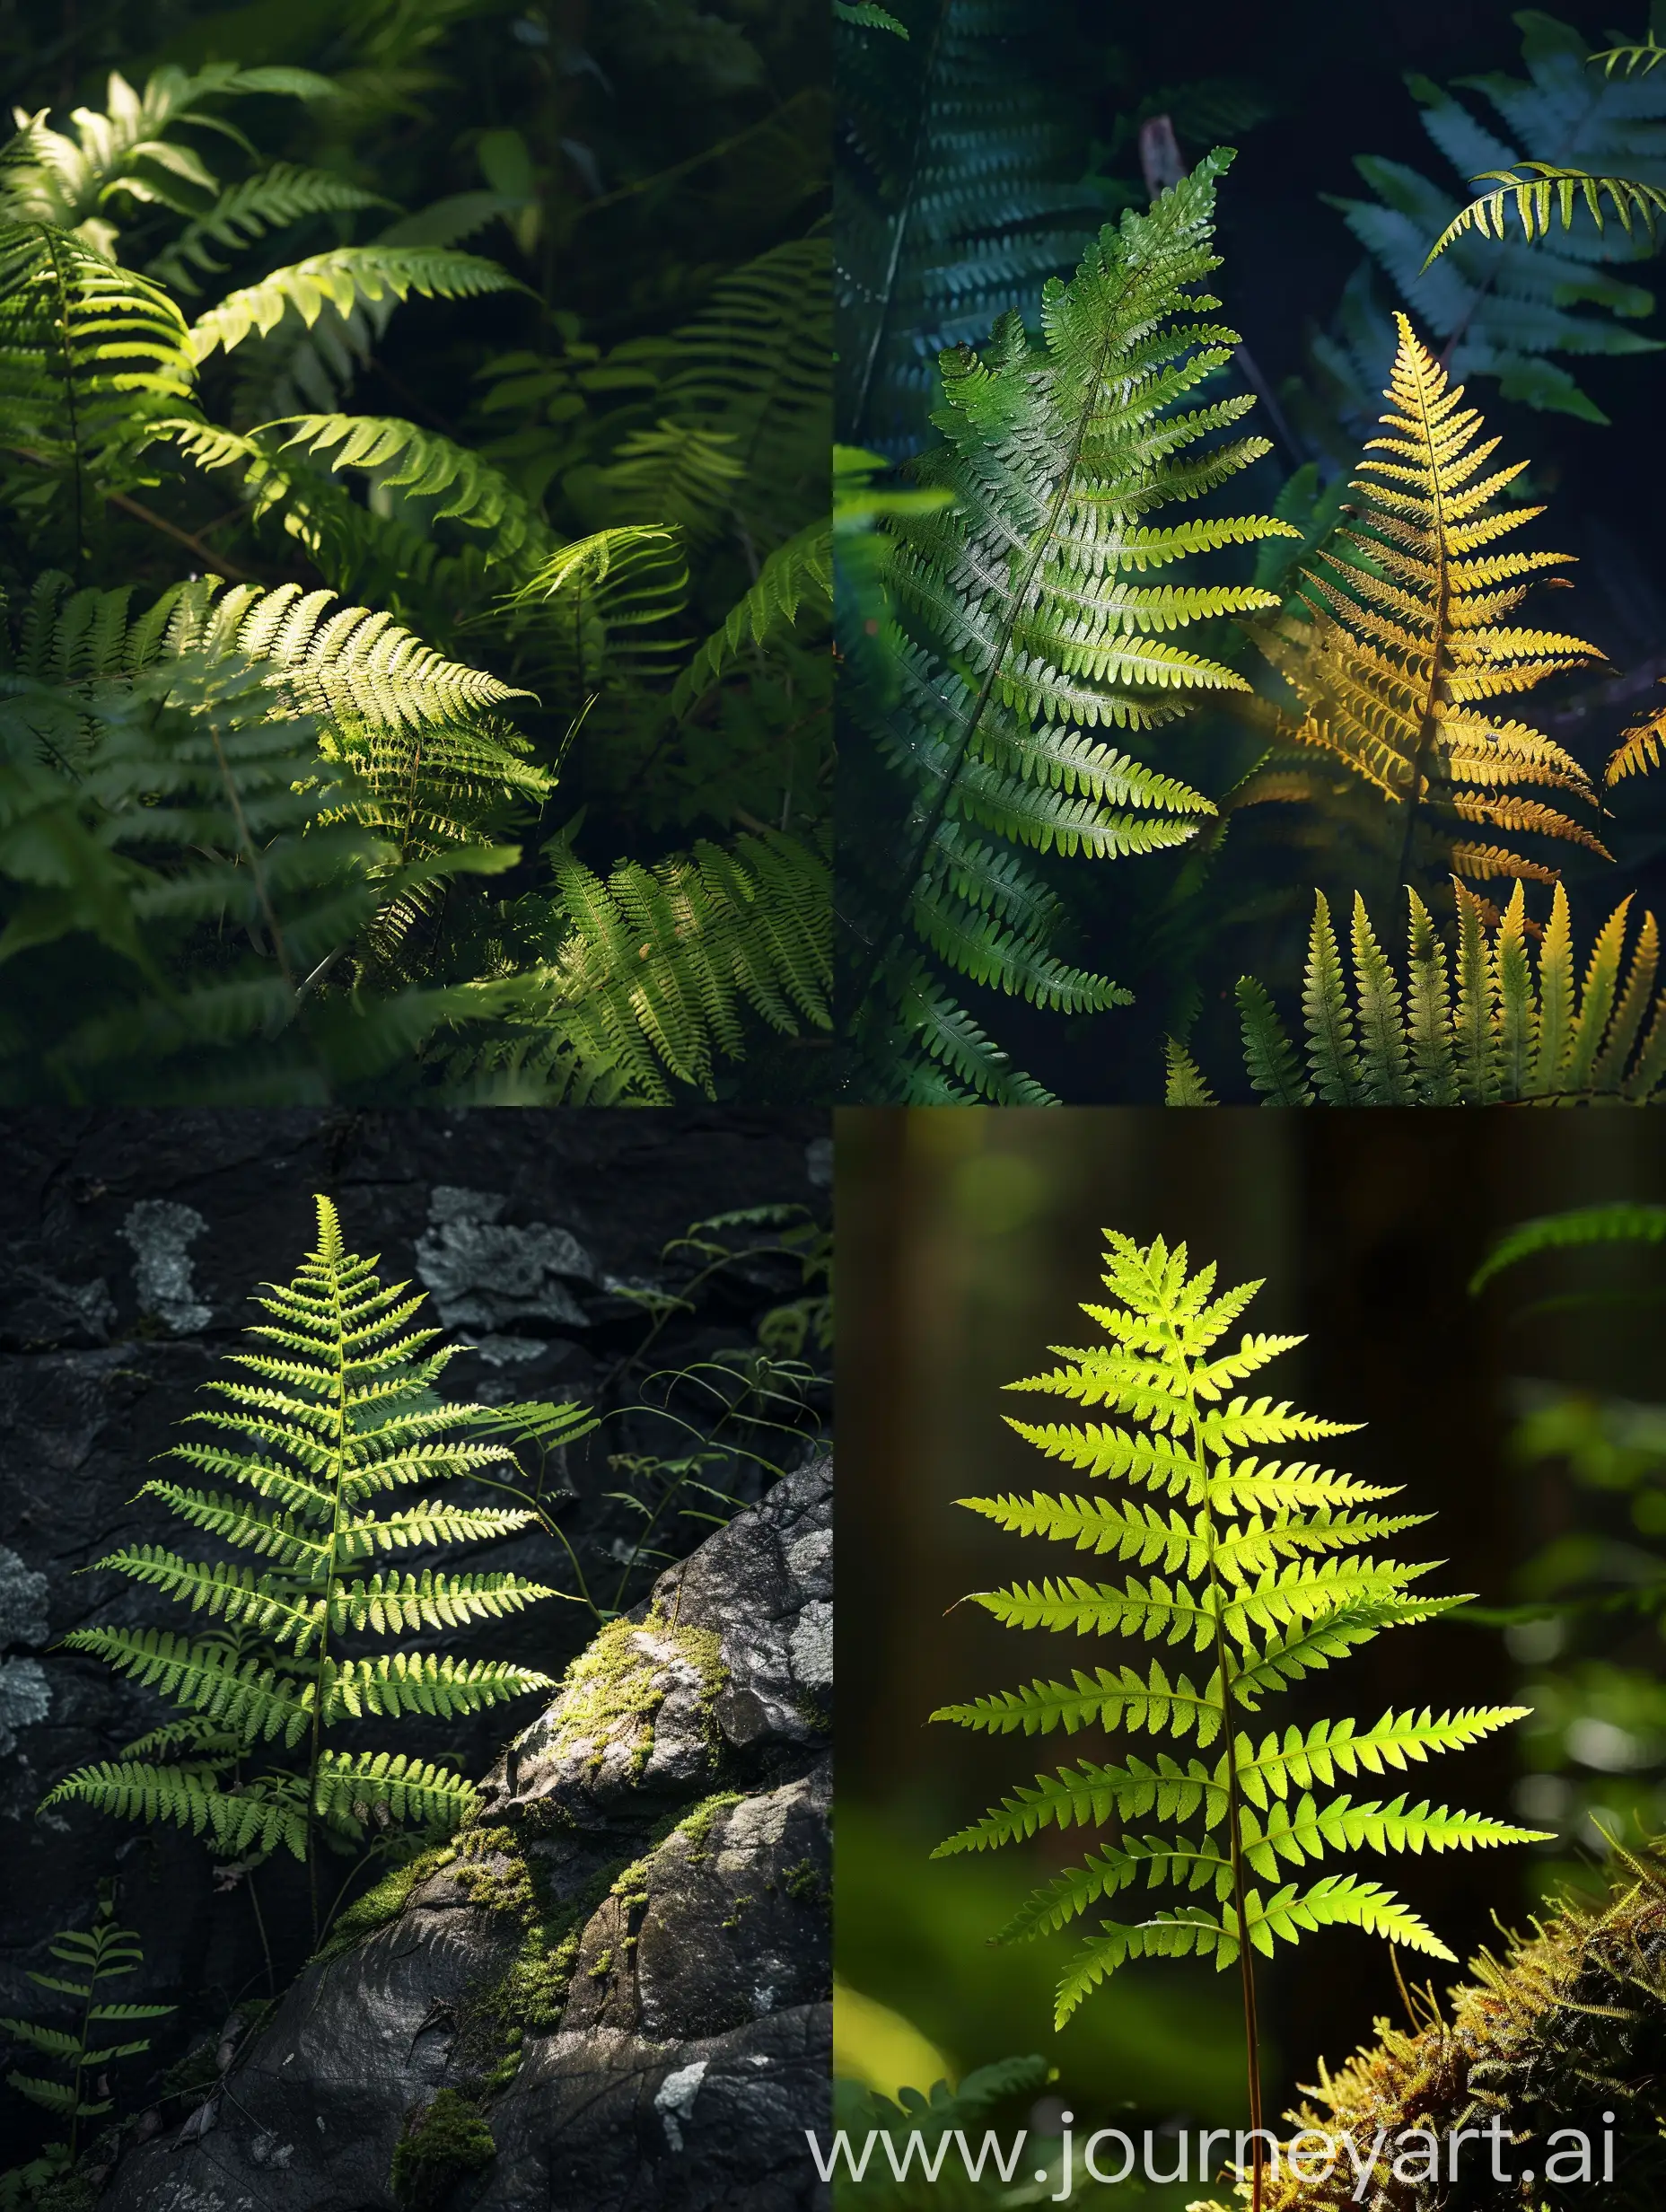 Luminous-Natural-Ferns-Capturing-Light-and-Texture-in-a-Serene-Setting